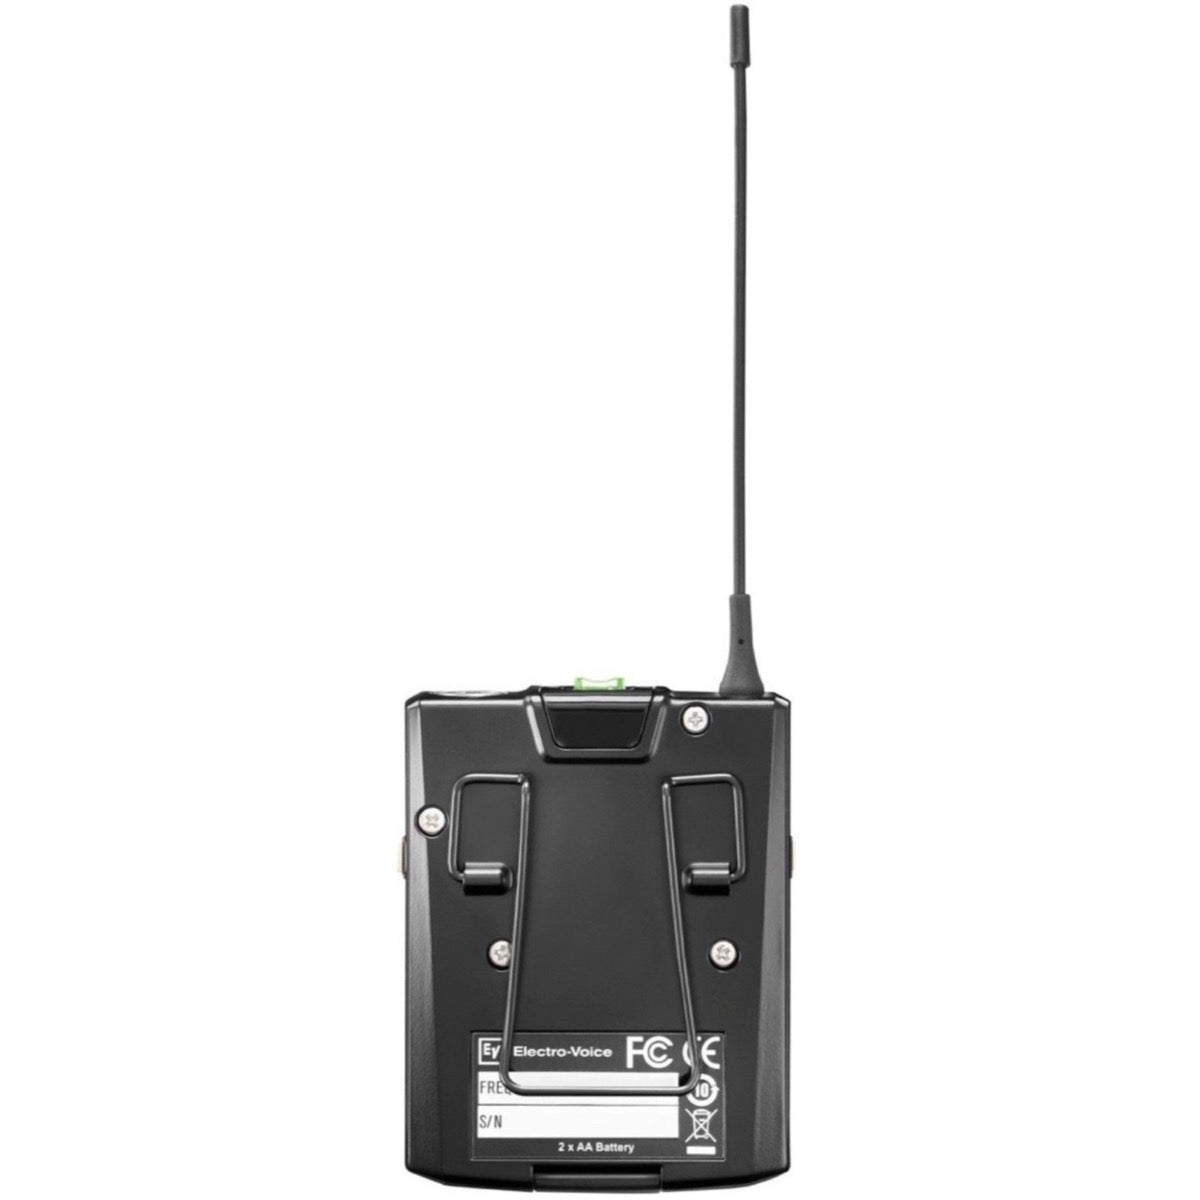 Electro-Voice RE3-BPHW Headset Wireless Microphone System, Band 6M (653-663 MHz)